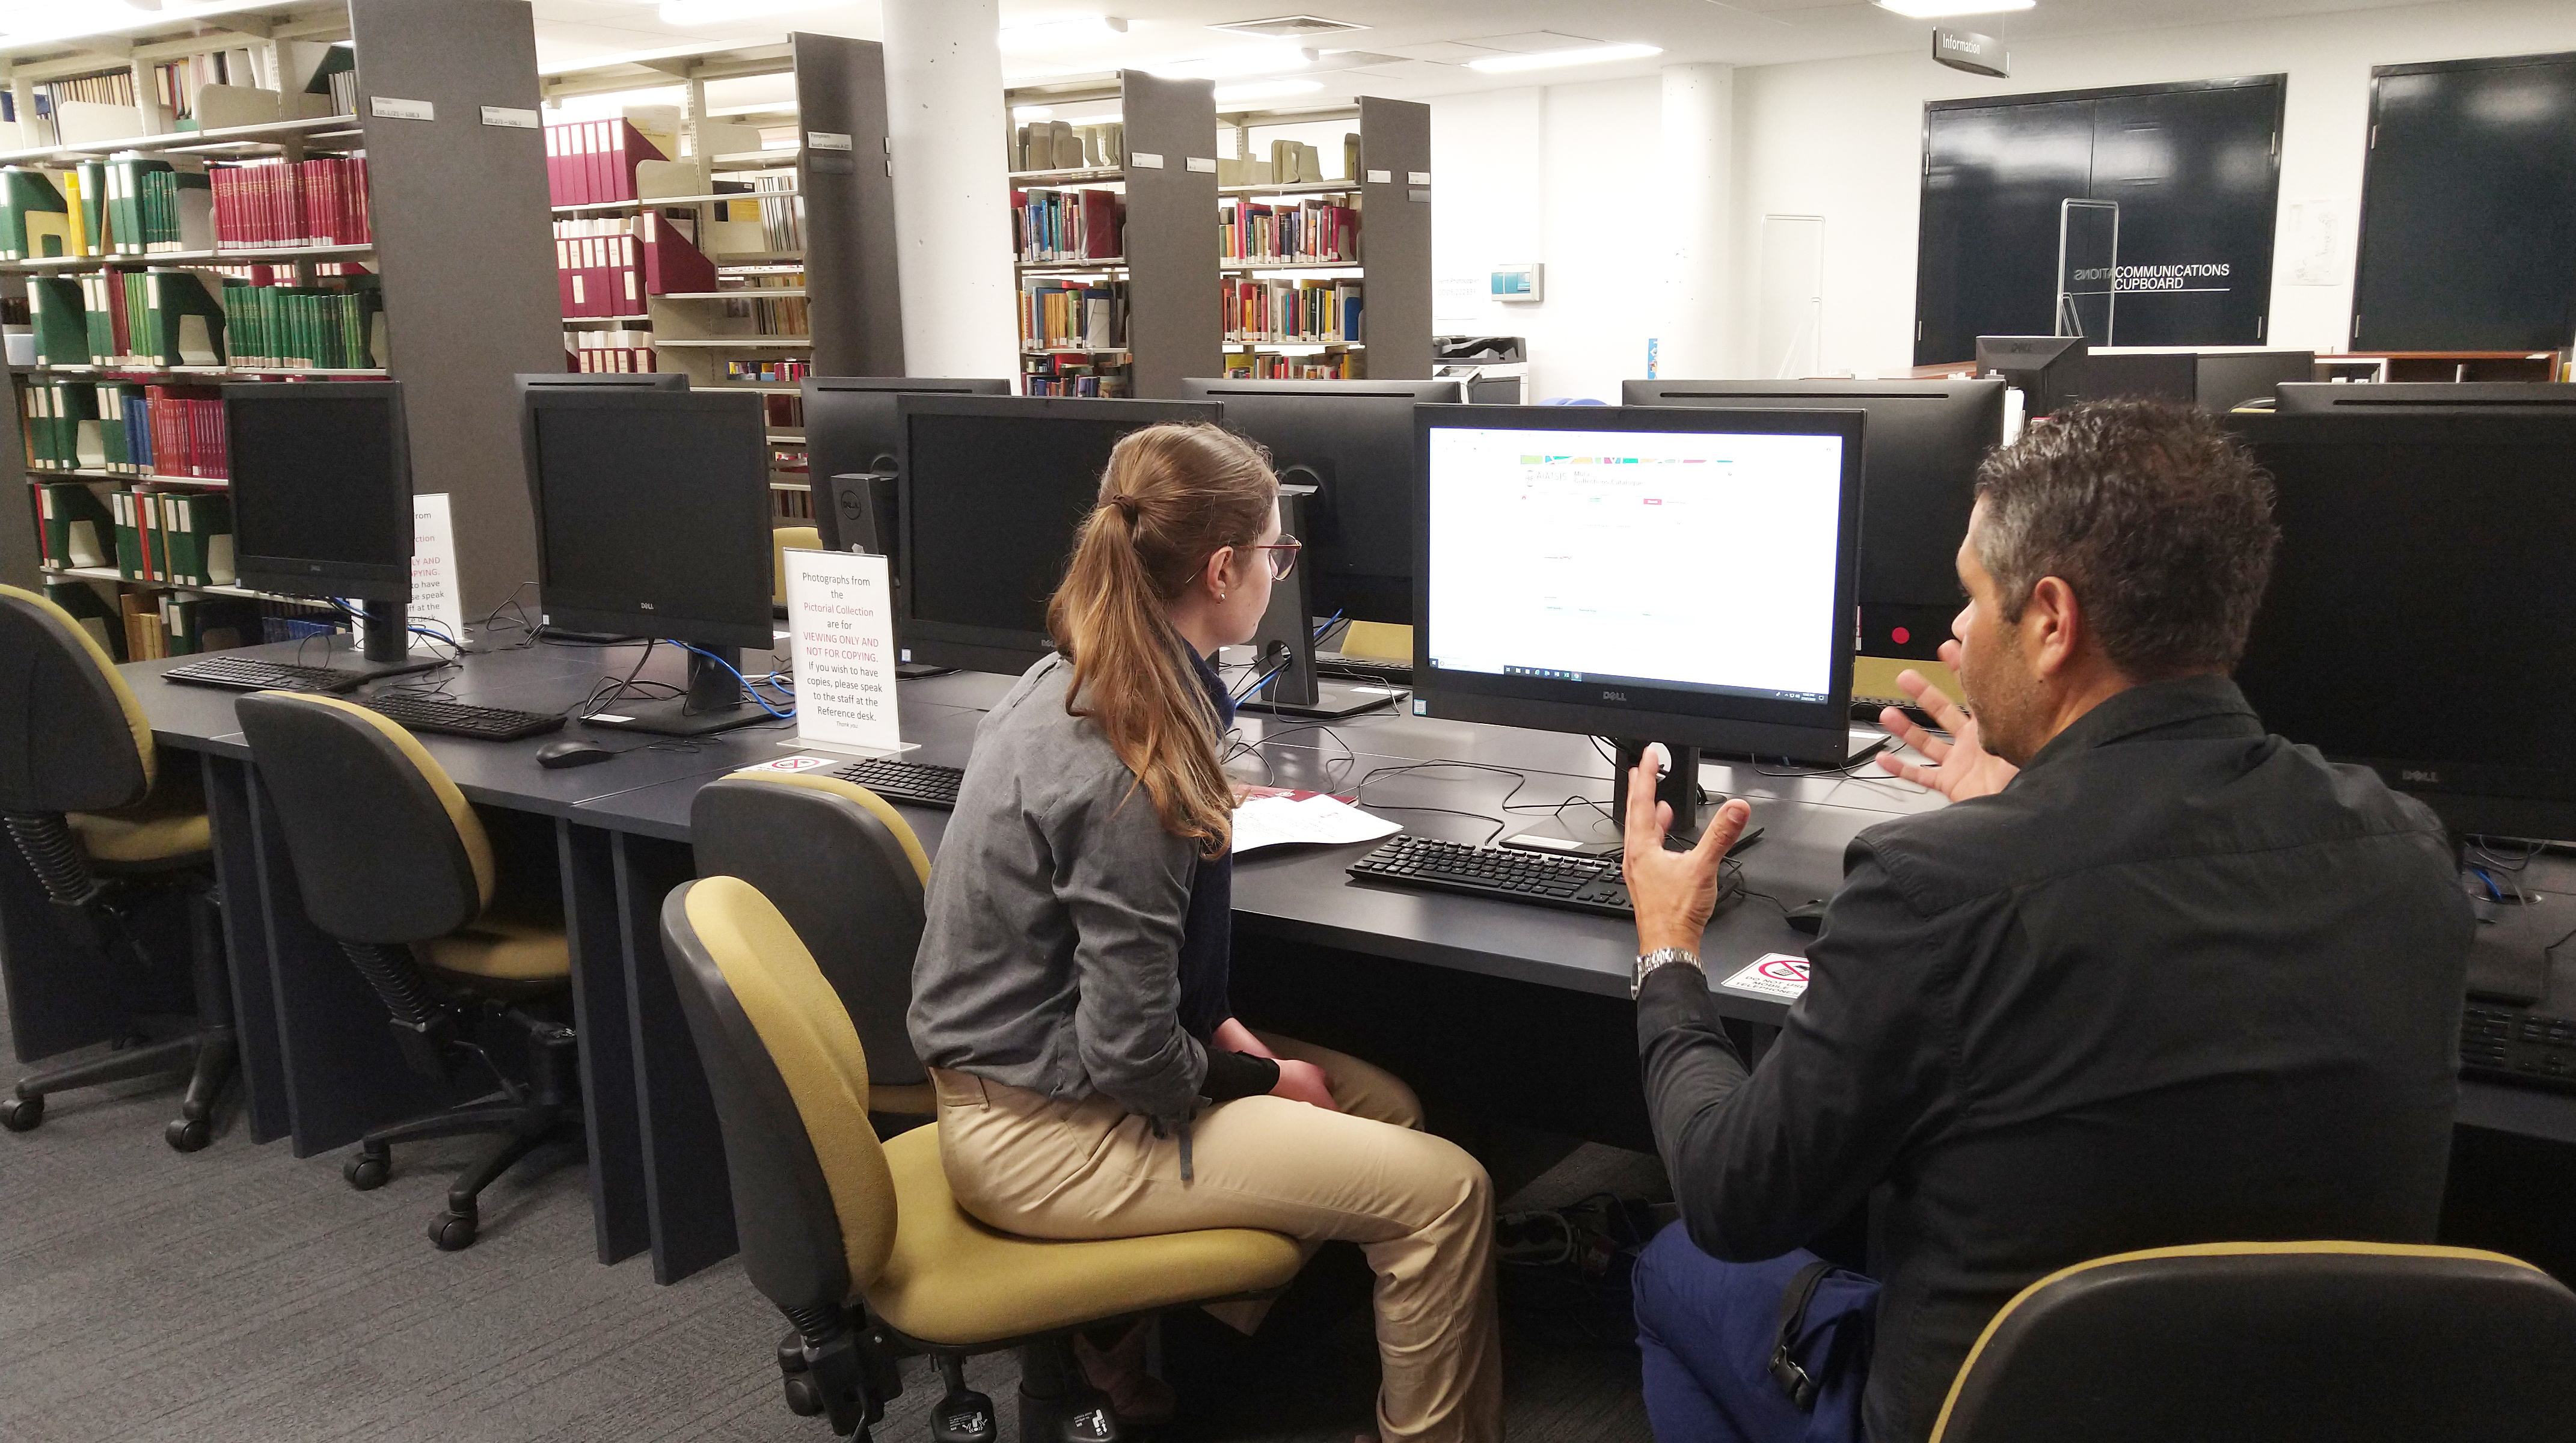 PJ Williams is instructing Mia Stone how to use the Mura catalogue in the AIATSIS Library.